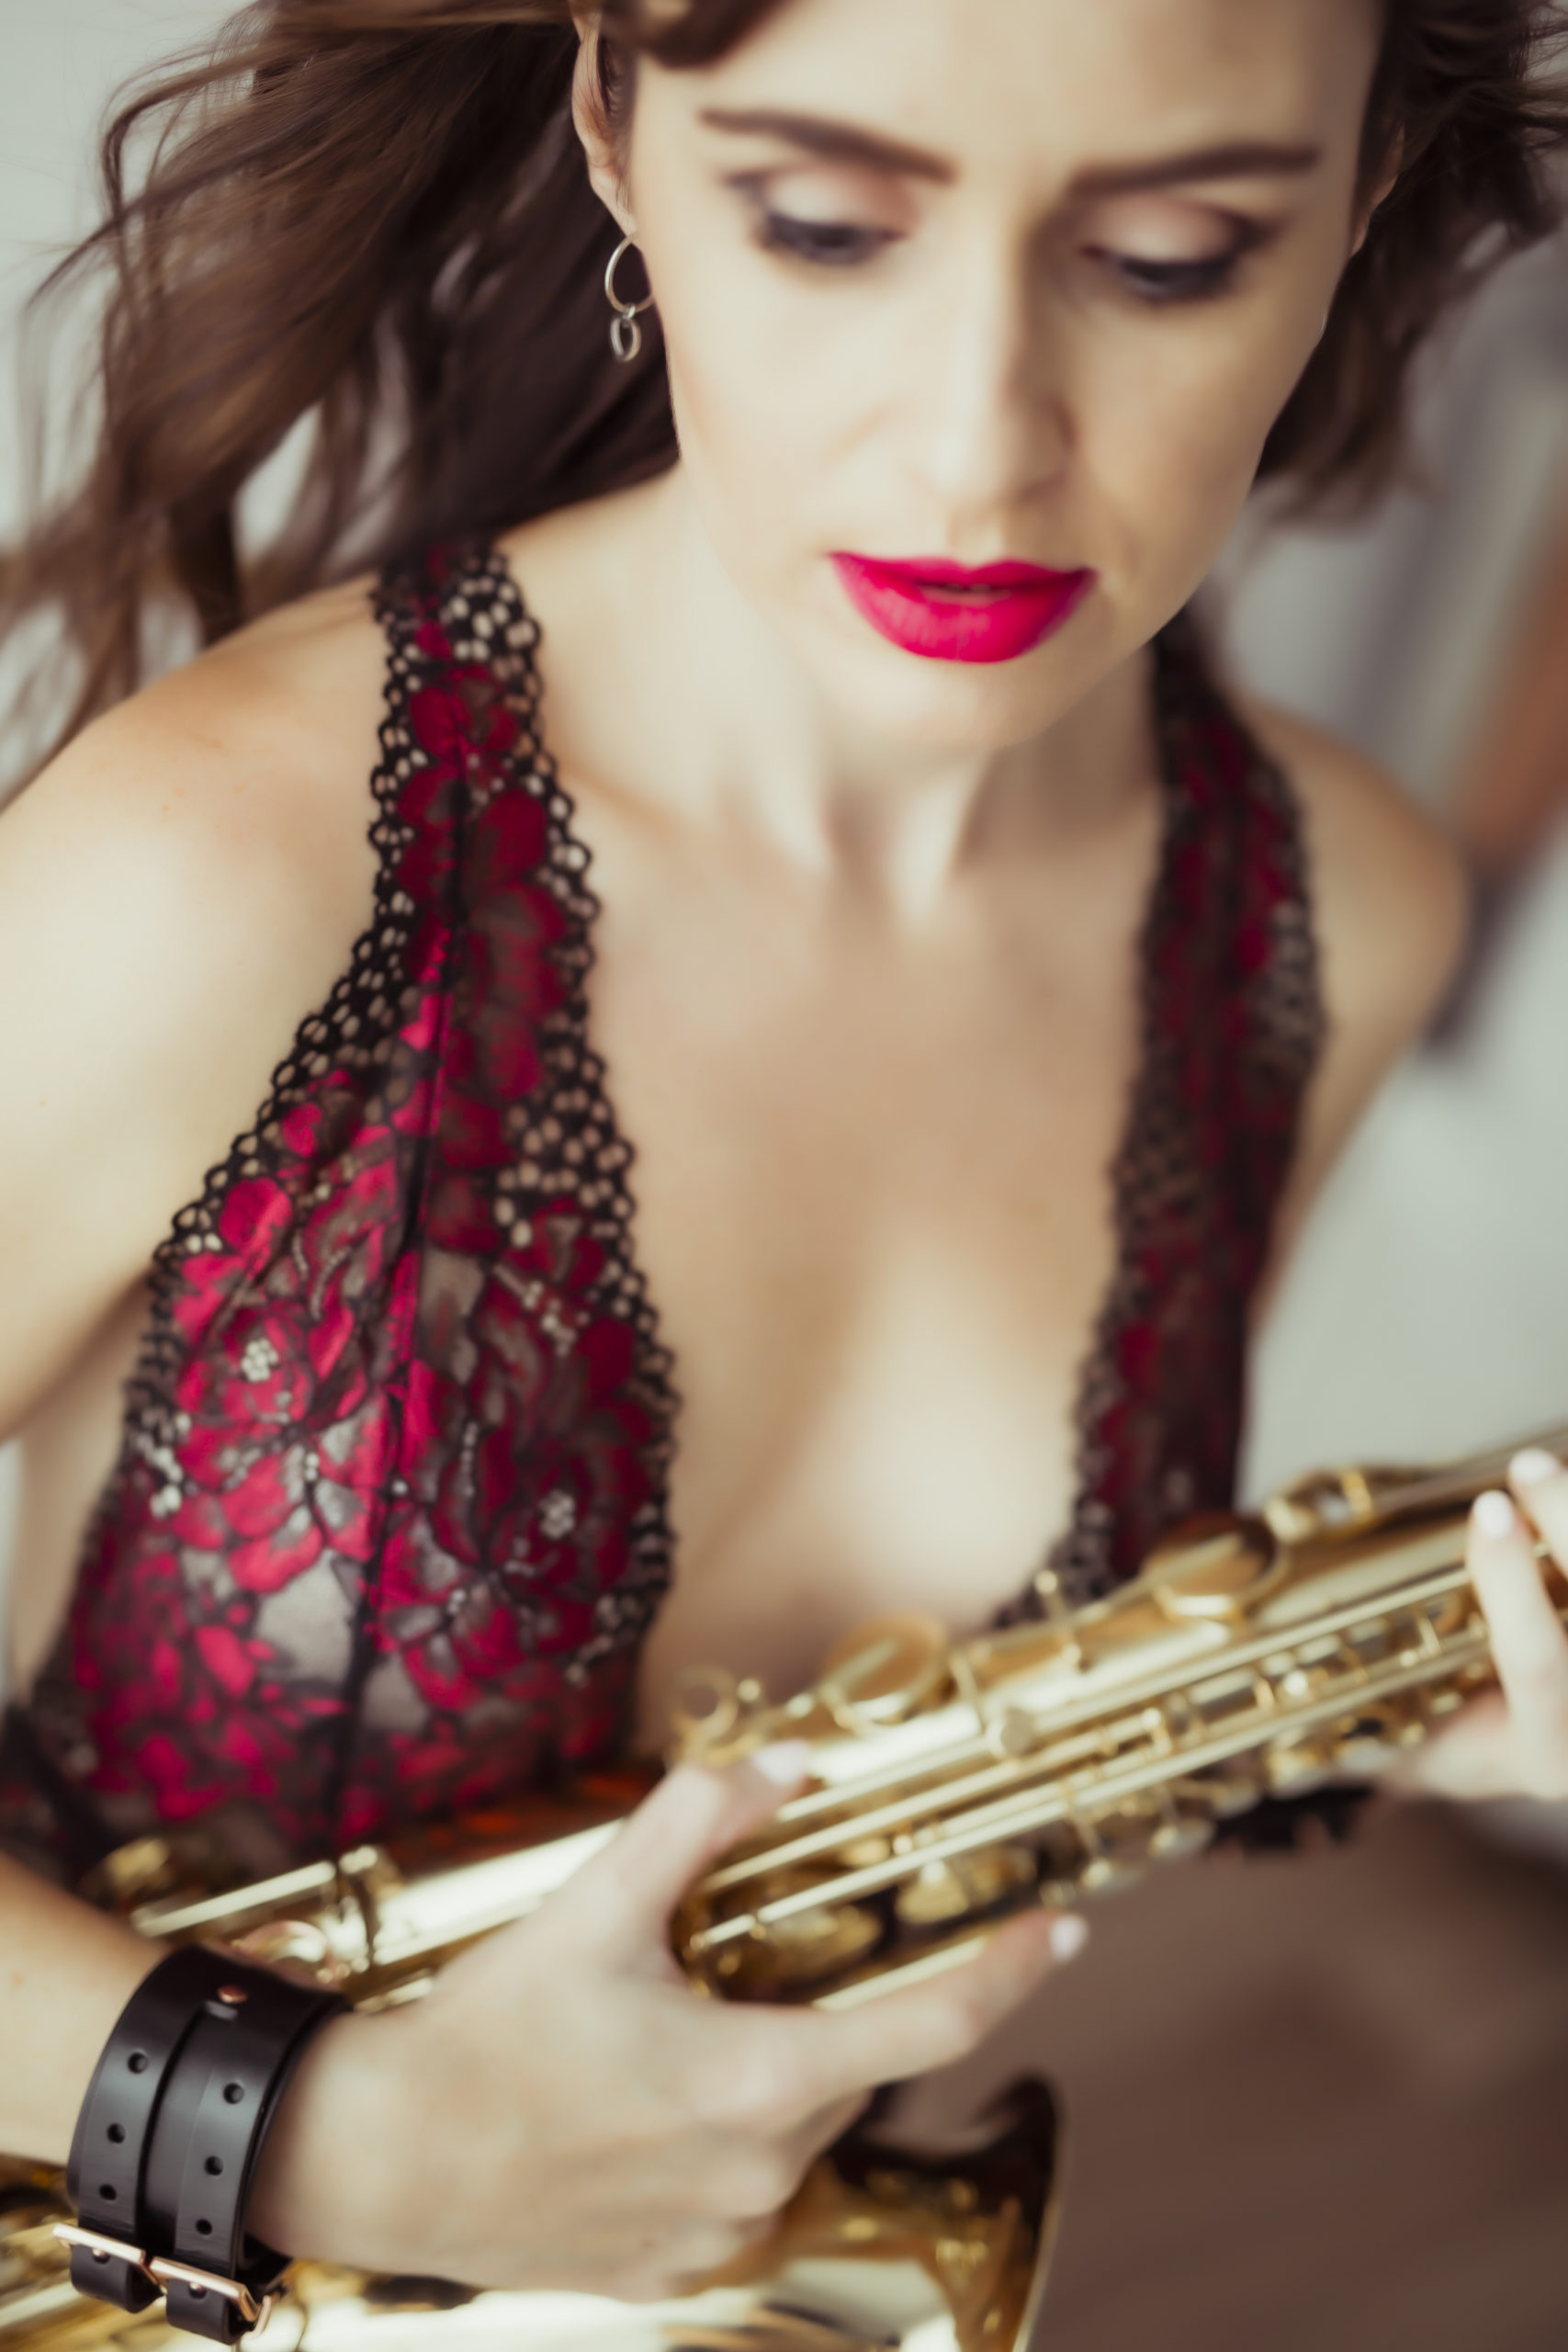 Red lips boudoir Shoot with saxophone